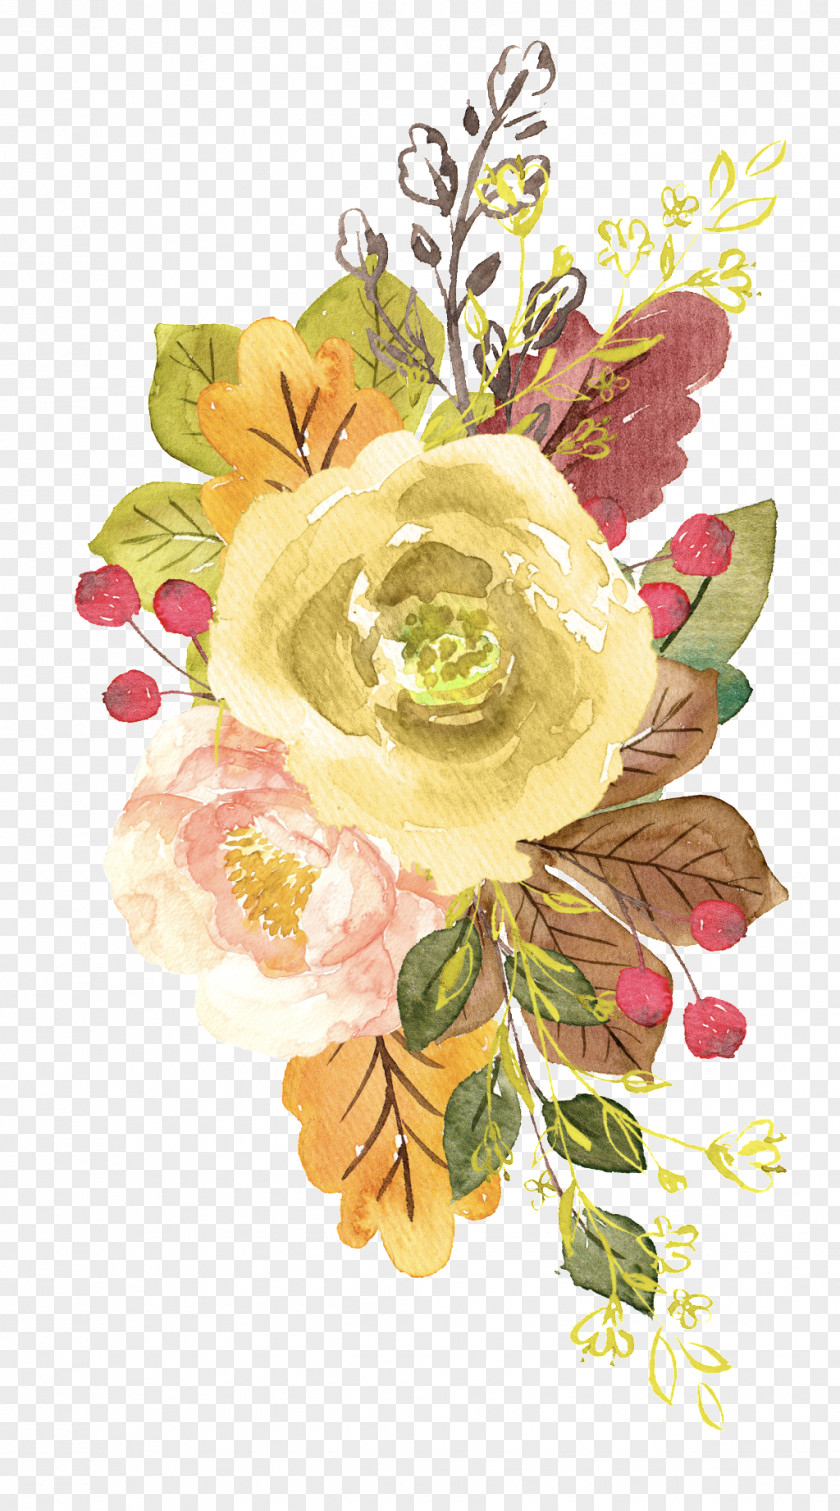 Watercolor Material Painting Illustration Watercolor: Flowers Image PNG